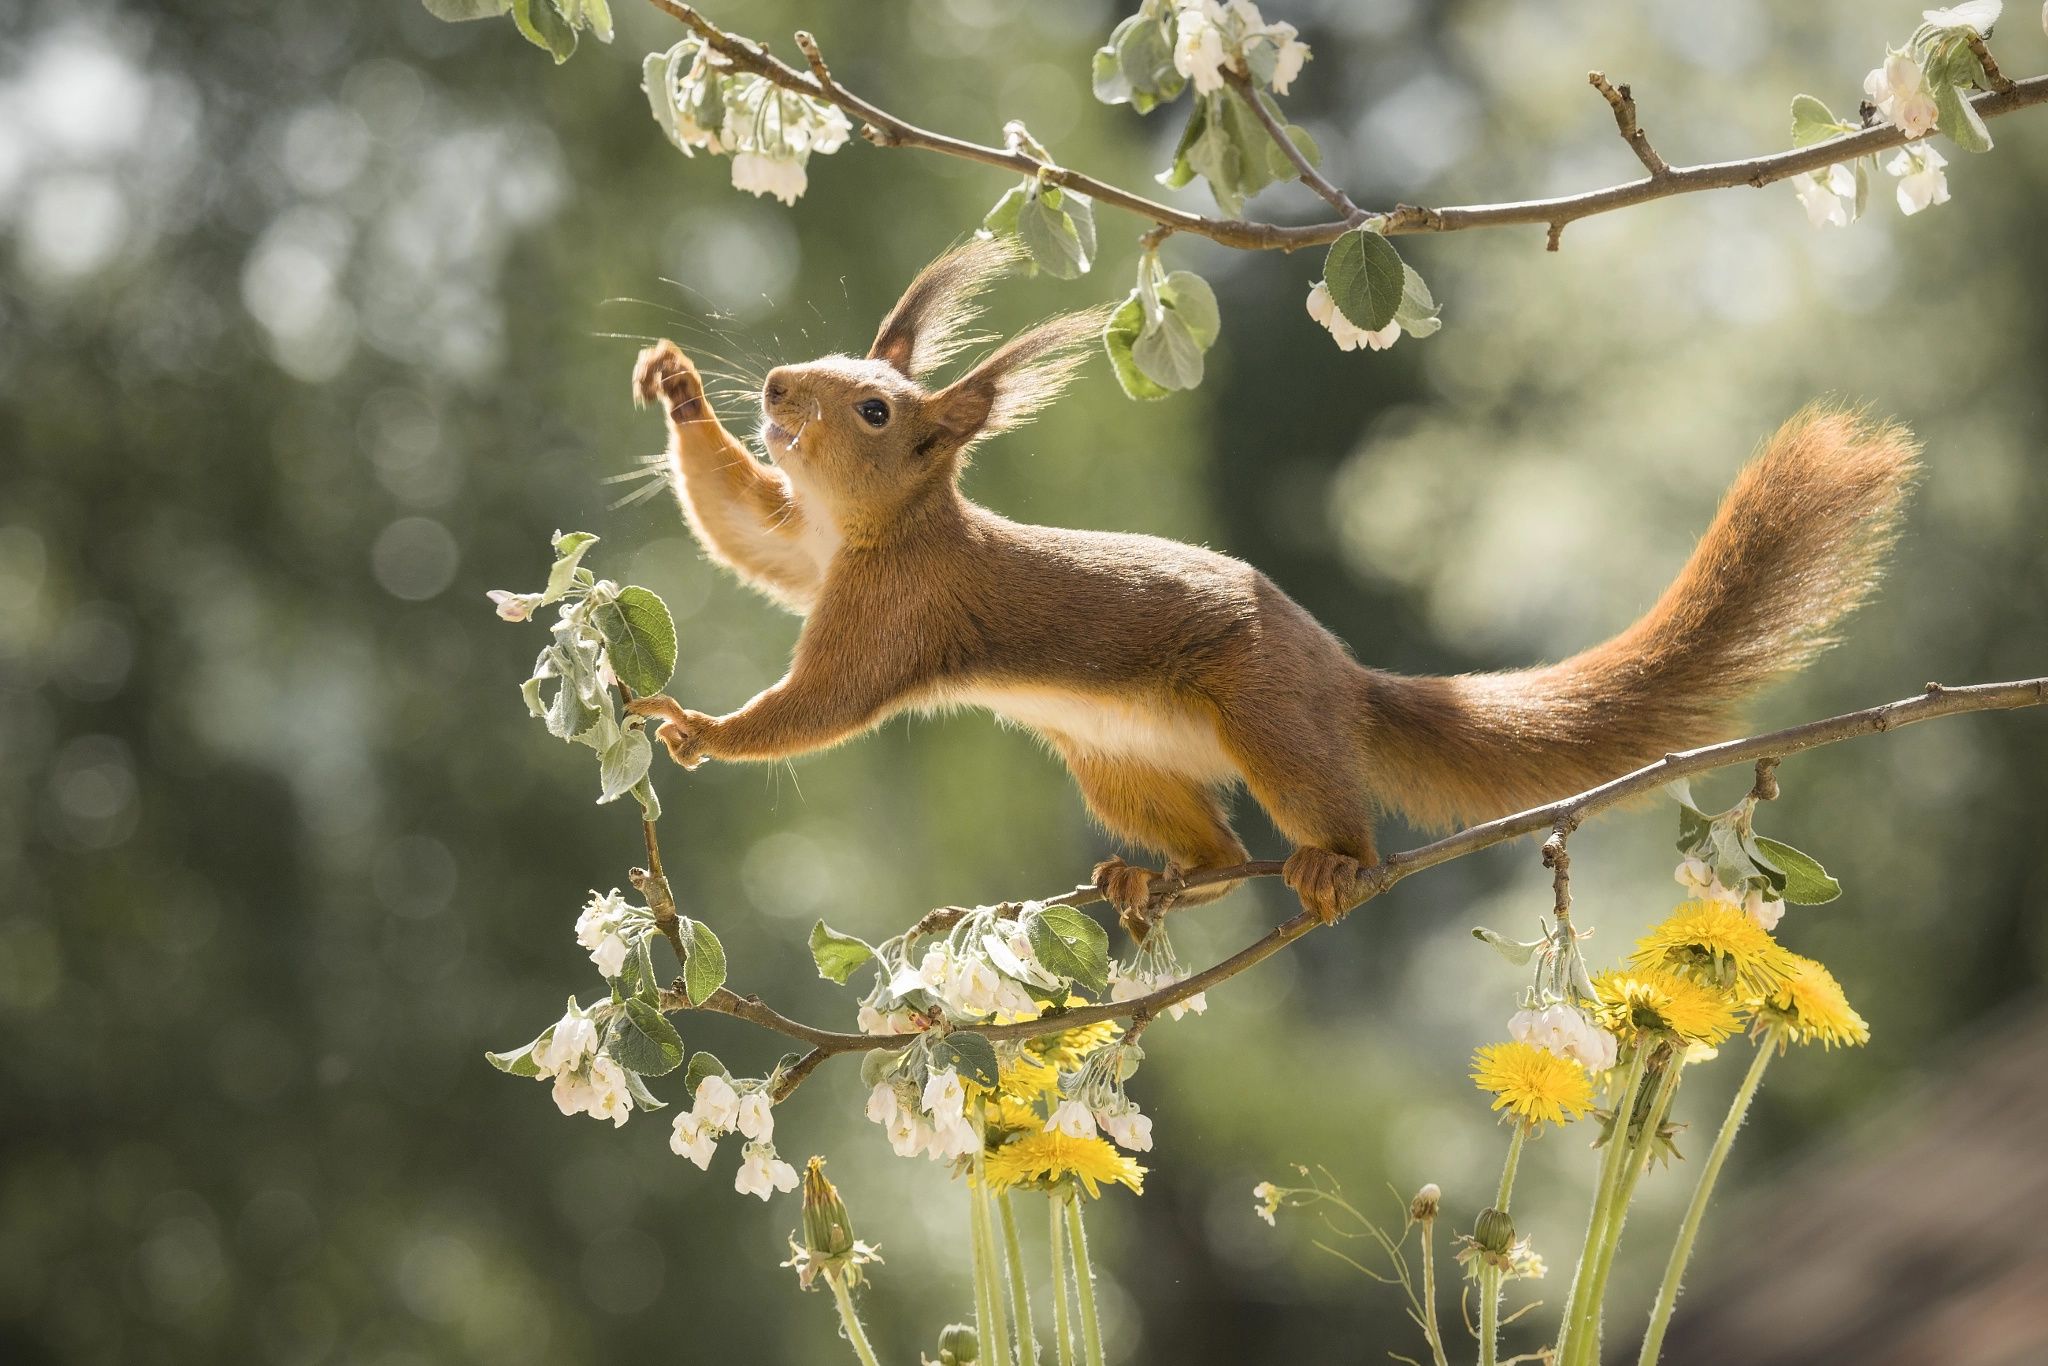 Wallpaper. Animals. photo. picture. flowers, branches, nature, pose, Animal